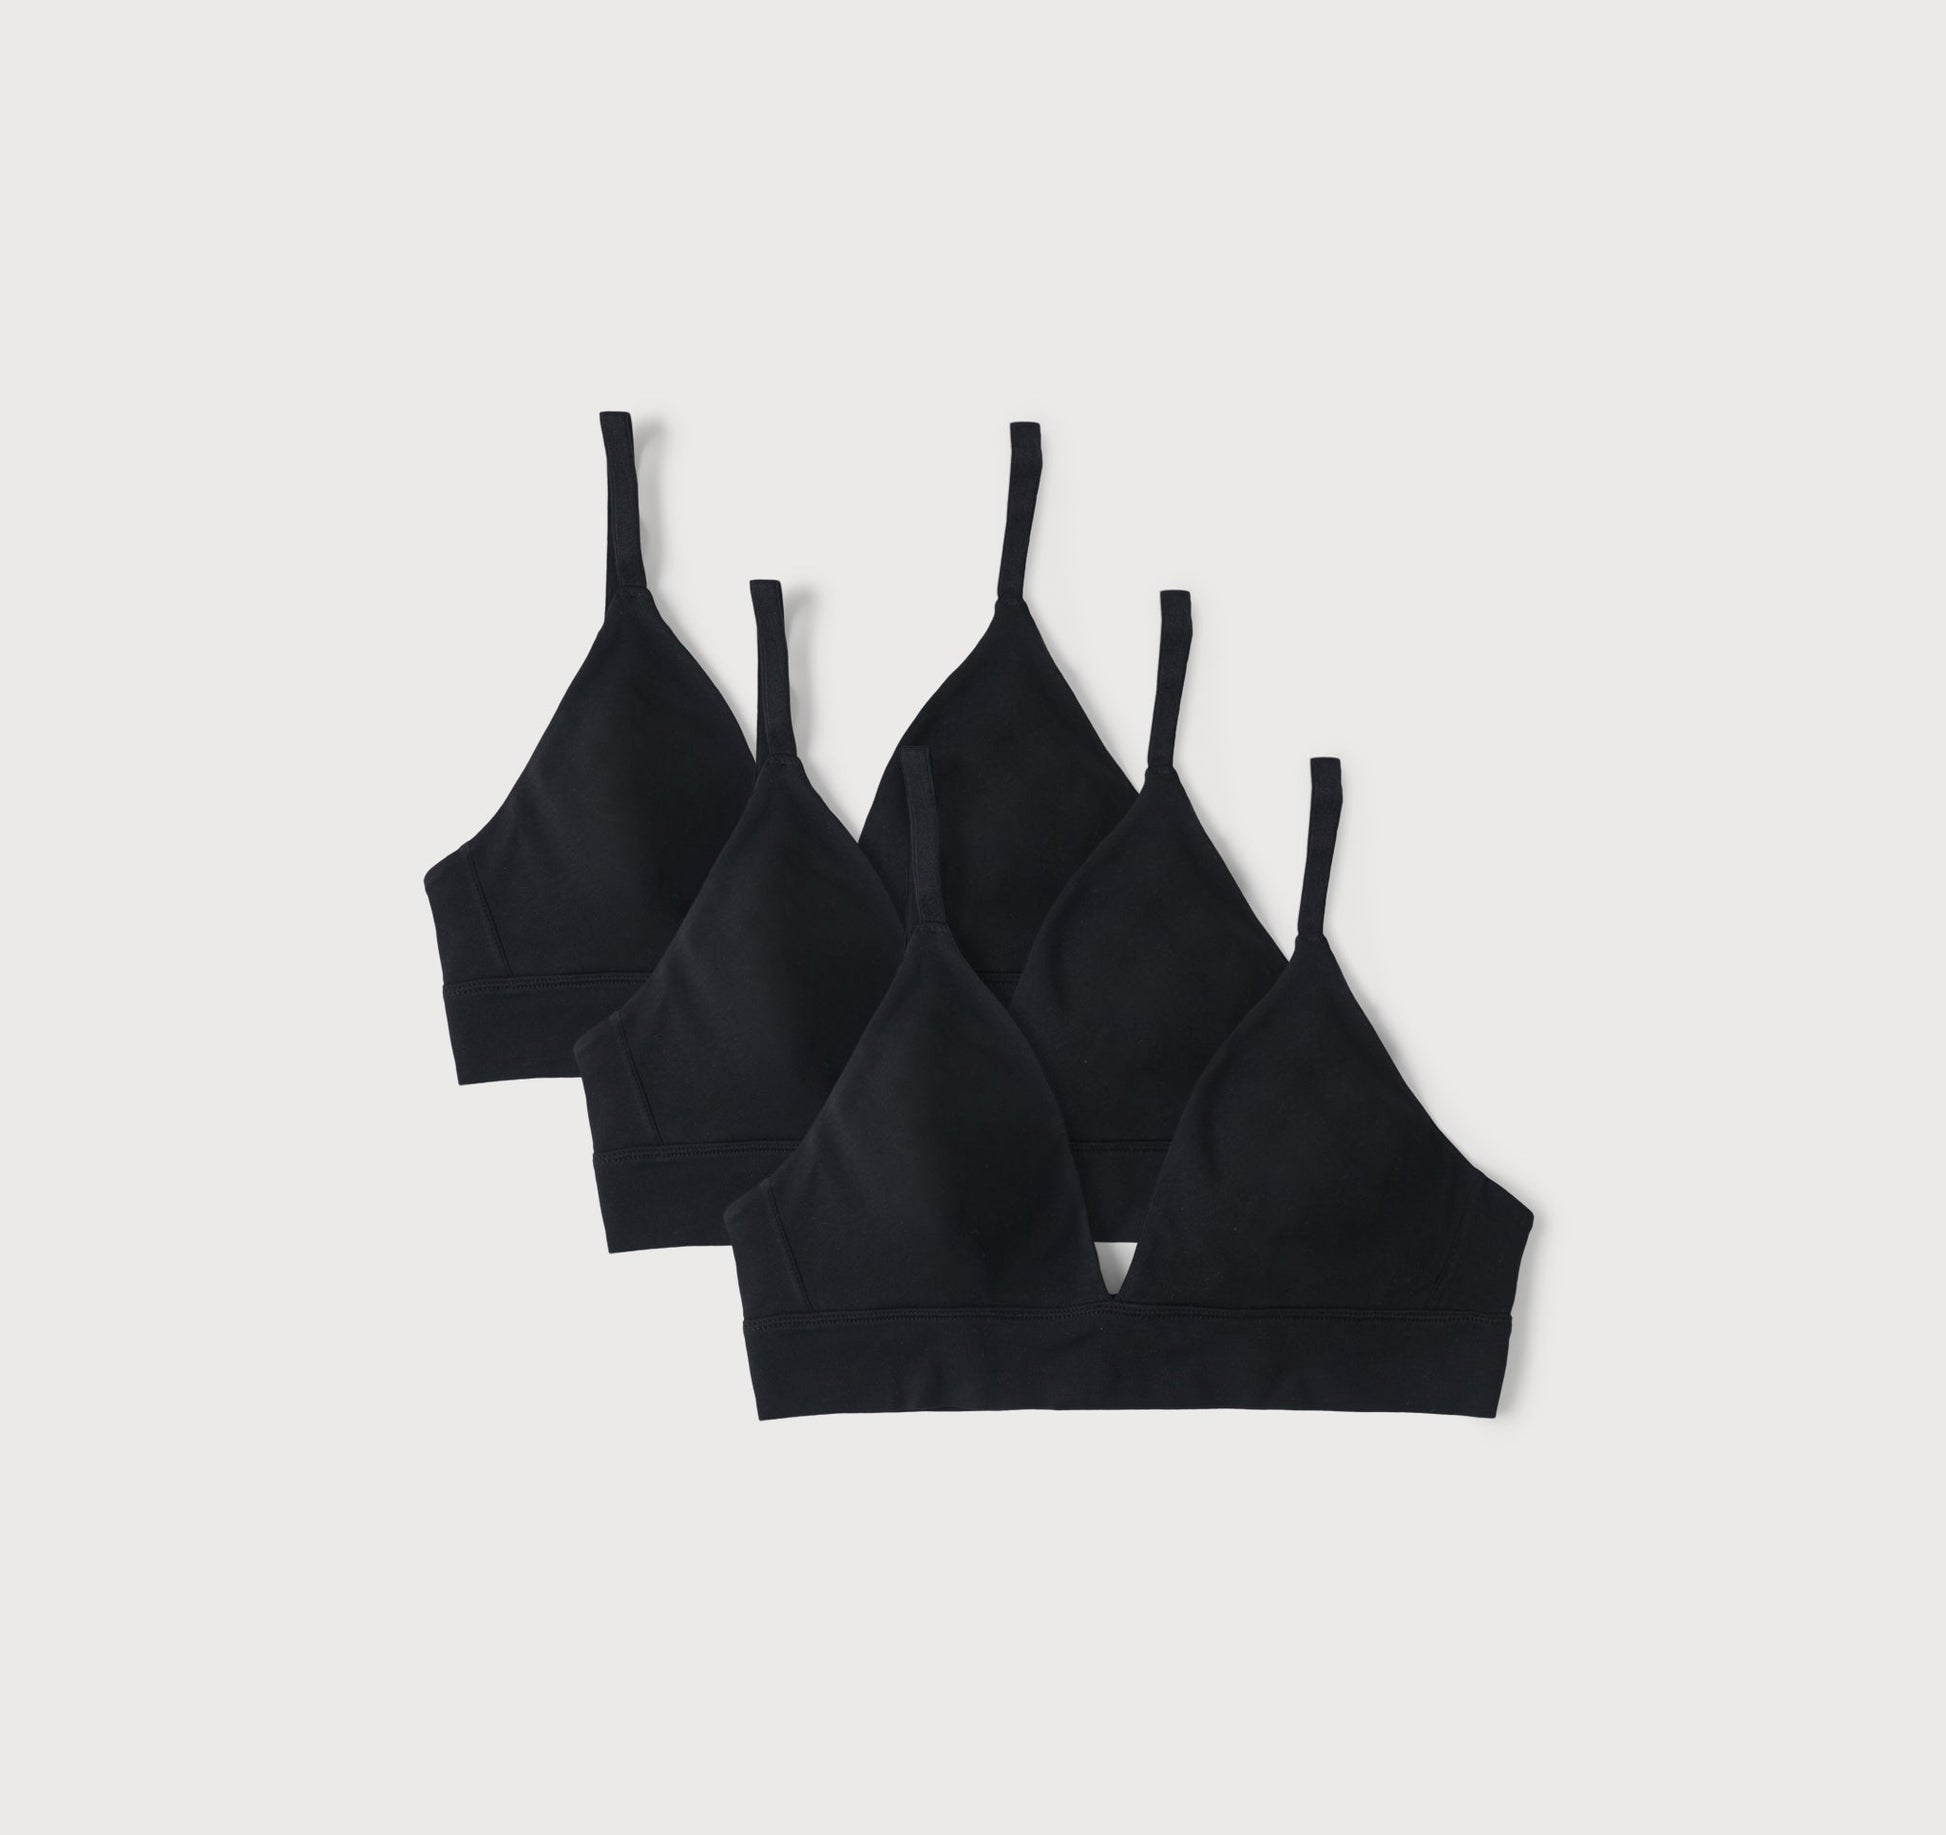 Buy Bralette Sewing Pattern Online In India -  India